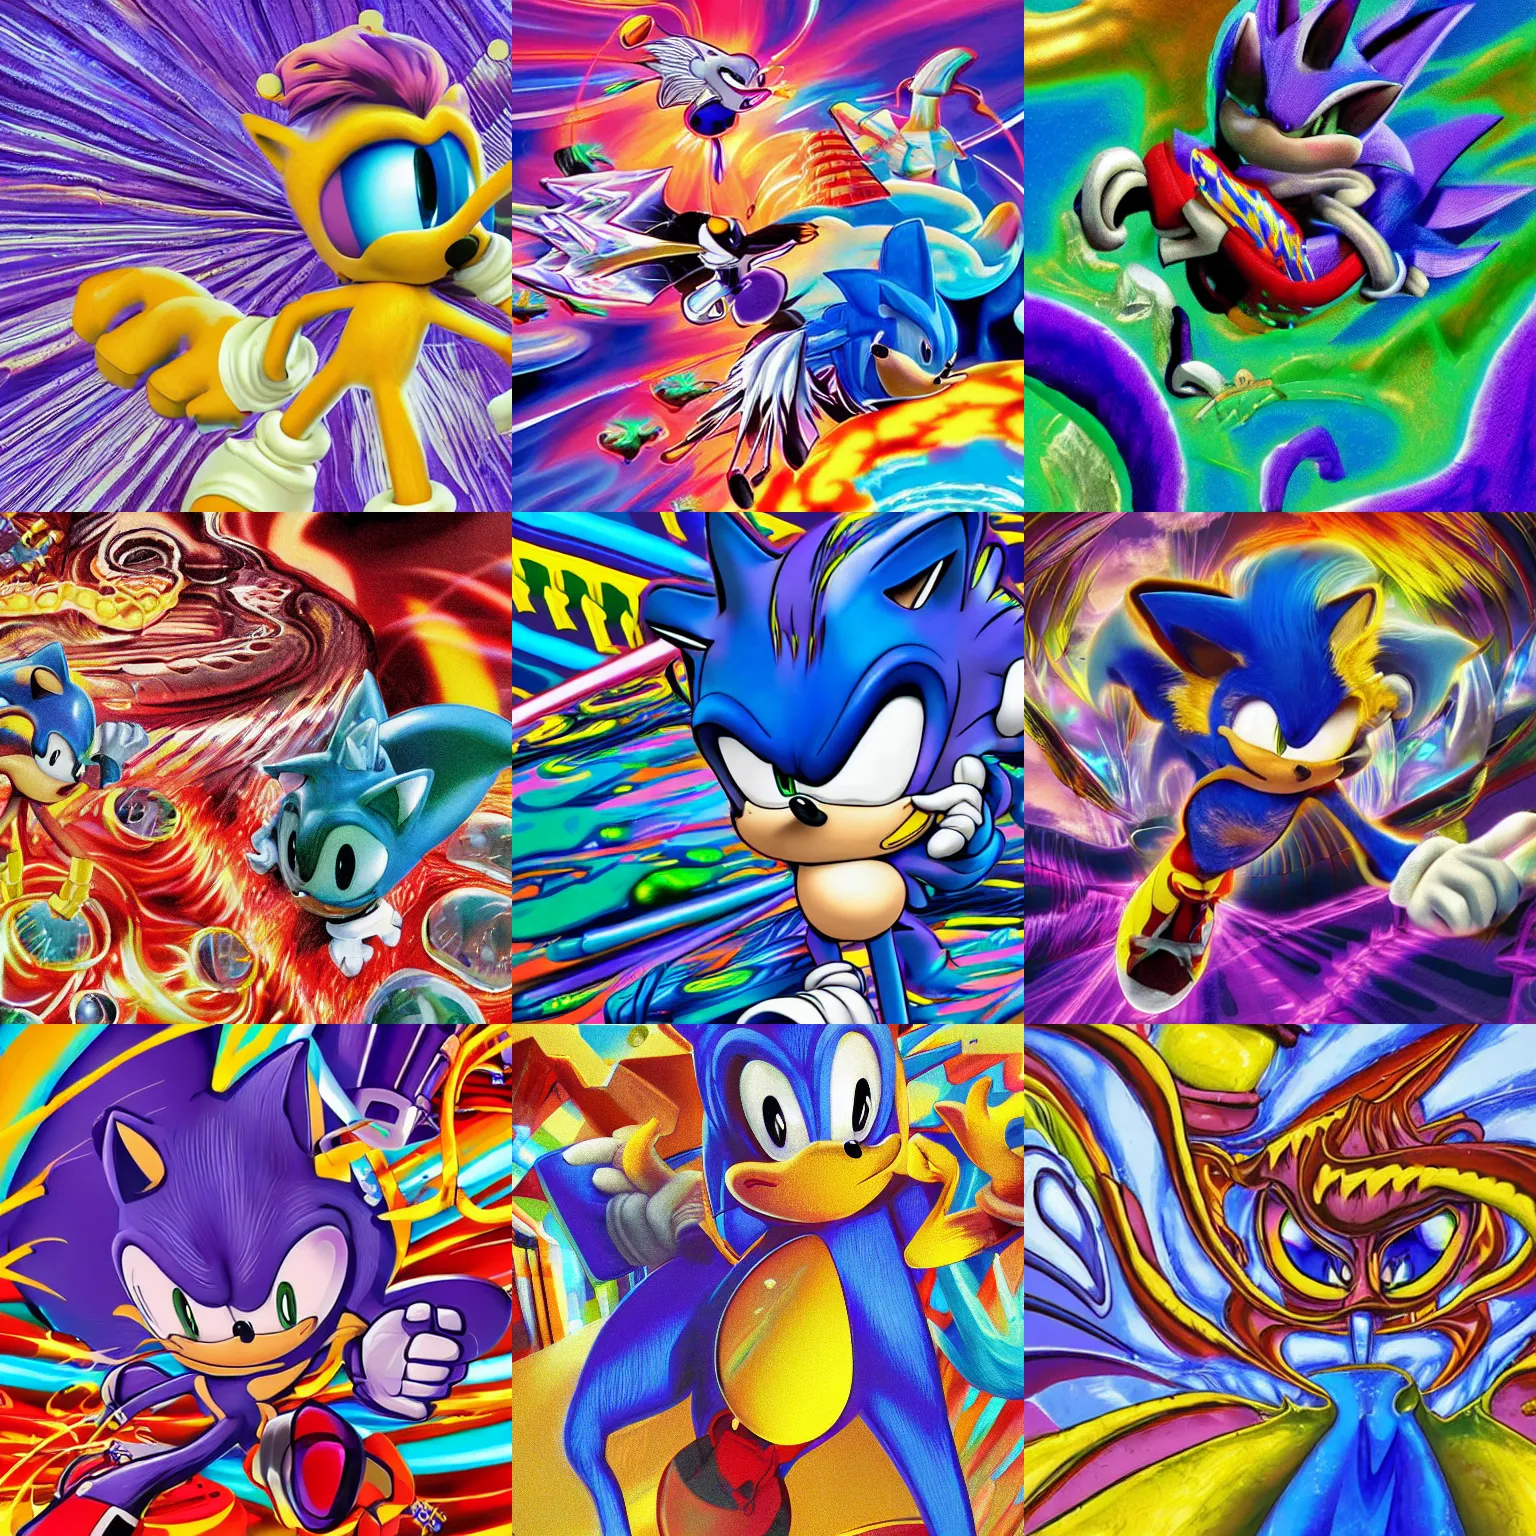 Prompt: sonic closeup of surreal, sharp, detailed professional, high quality airbrush art MGMT album cover of a liquid dissolving LSD DMT sonic the hedgehog surfing through cyberspace, purple checkerboard background, 1990s 1992 Sega Genesis video game album cover